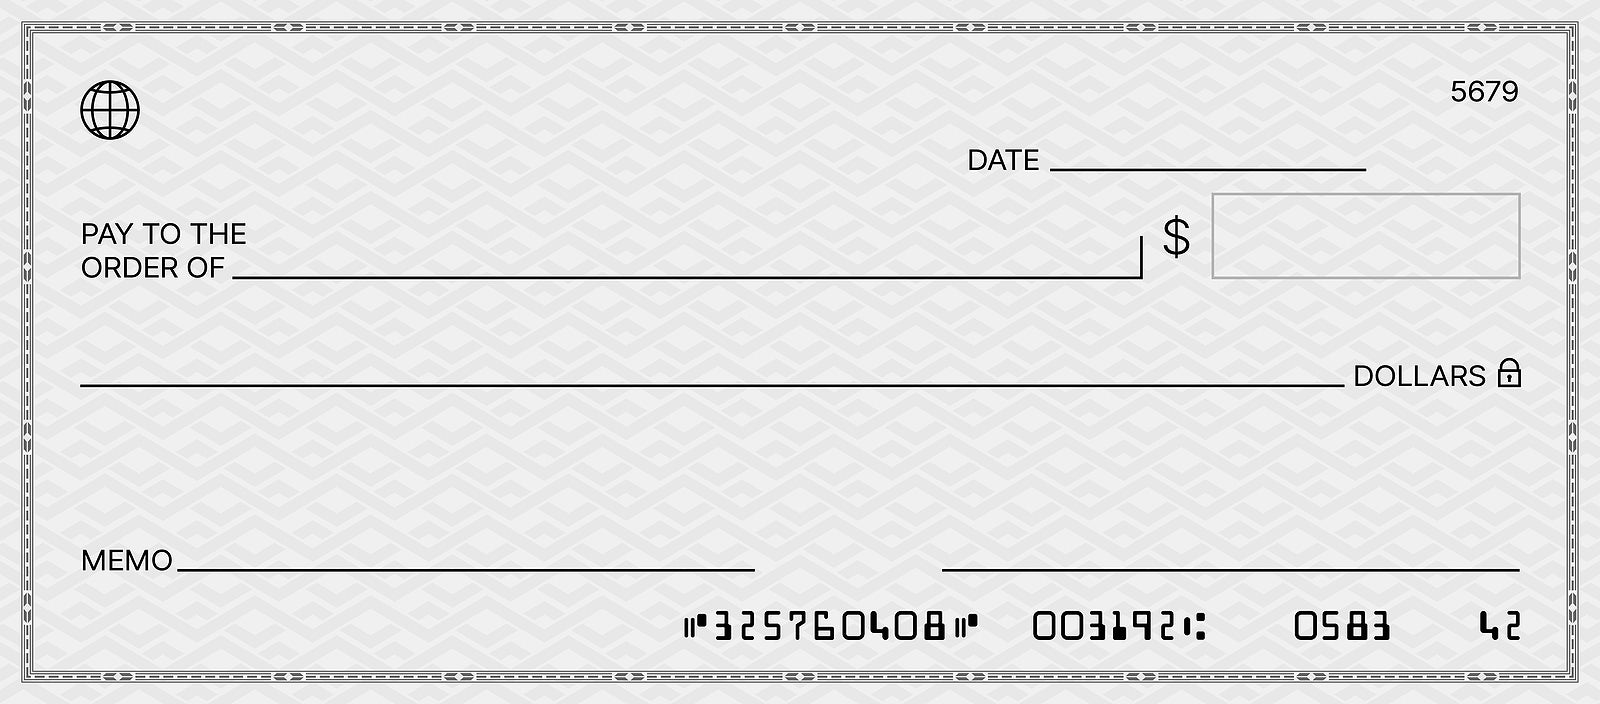 Cashier's Check vs. Money Order: What's the Difference?